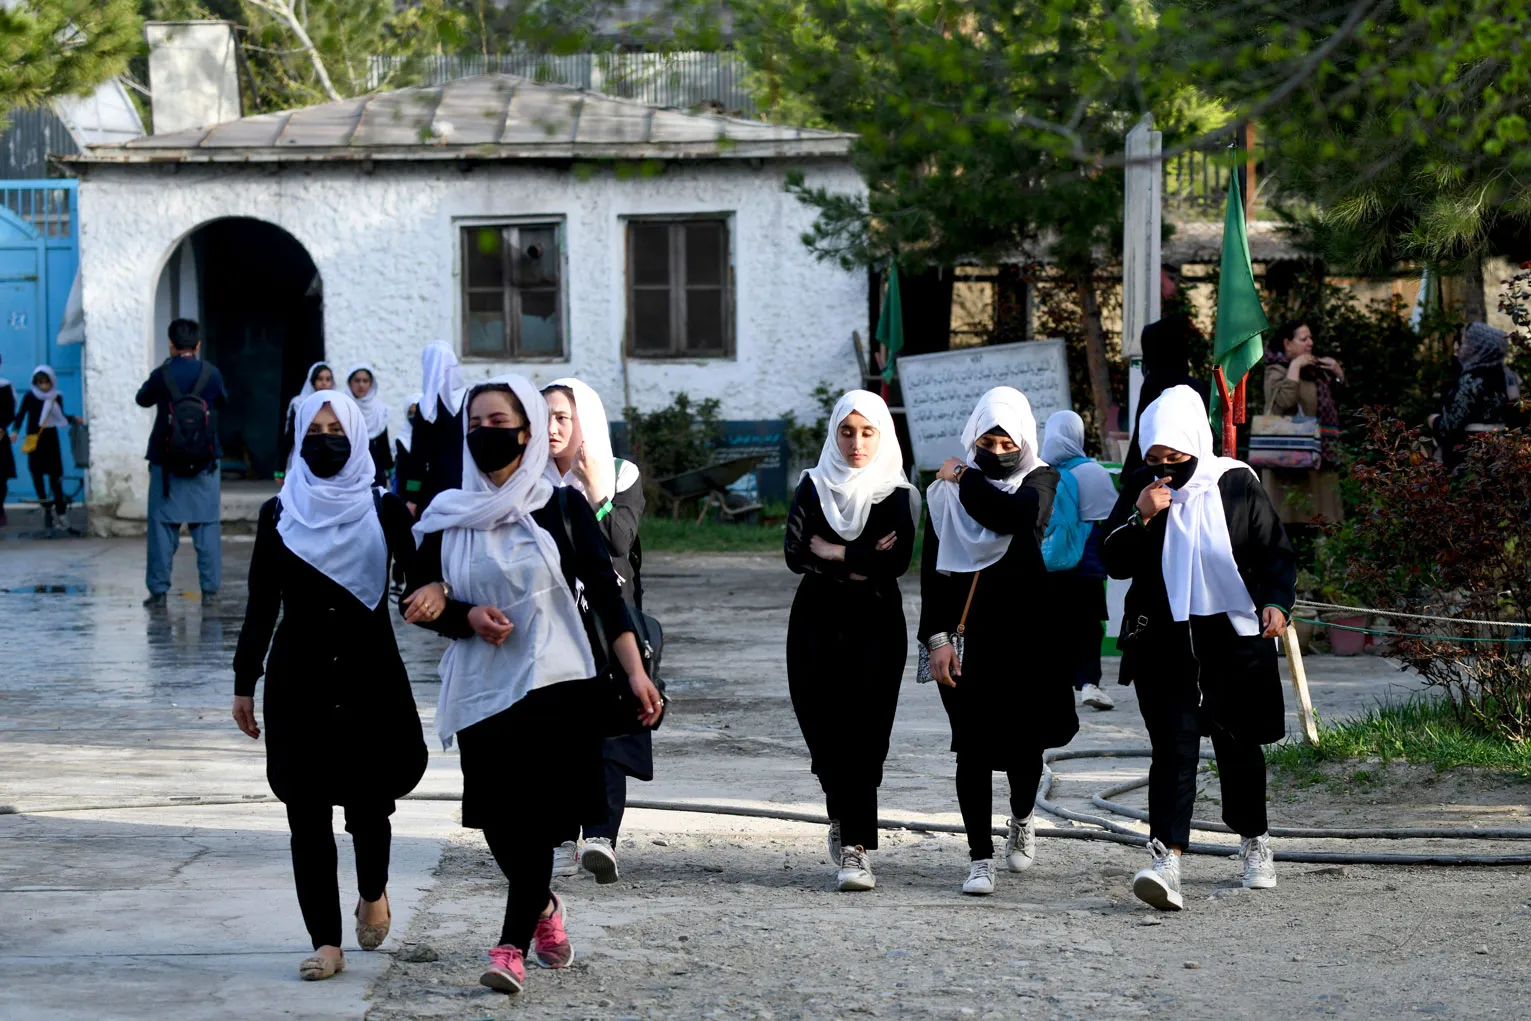 Womens Education Weaponized in Afghanistan South Asia Times (satimes.tv)